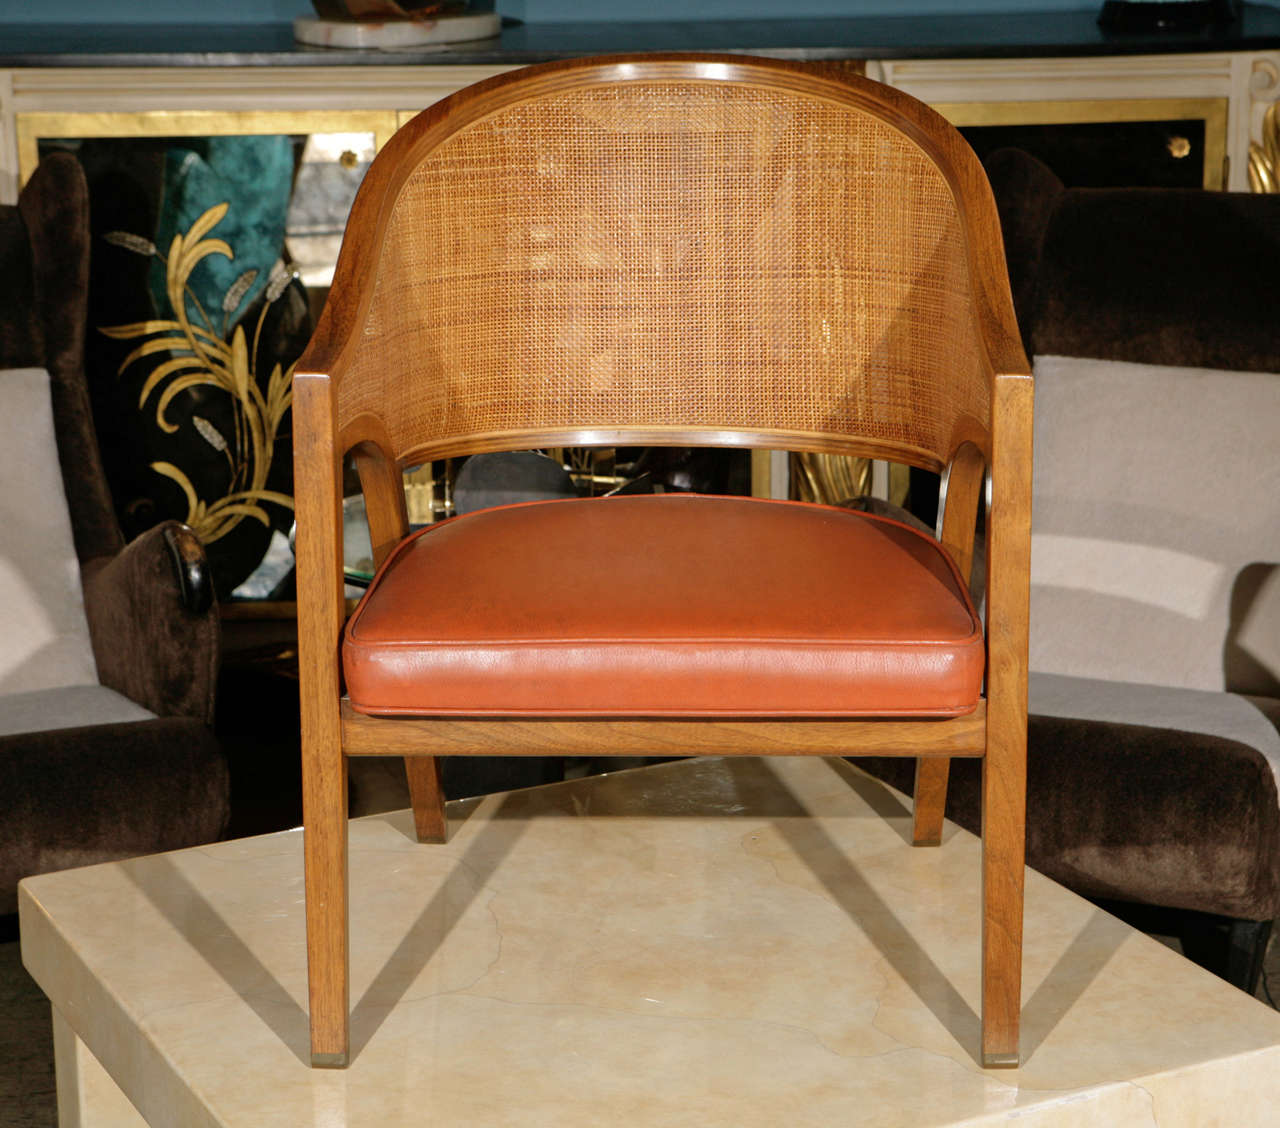 Single mid century armchair by Edward Wormley for Dunbar. Has a finely caned back seat and brass feet.  Seat is in orange leather.